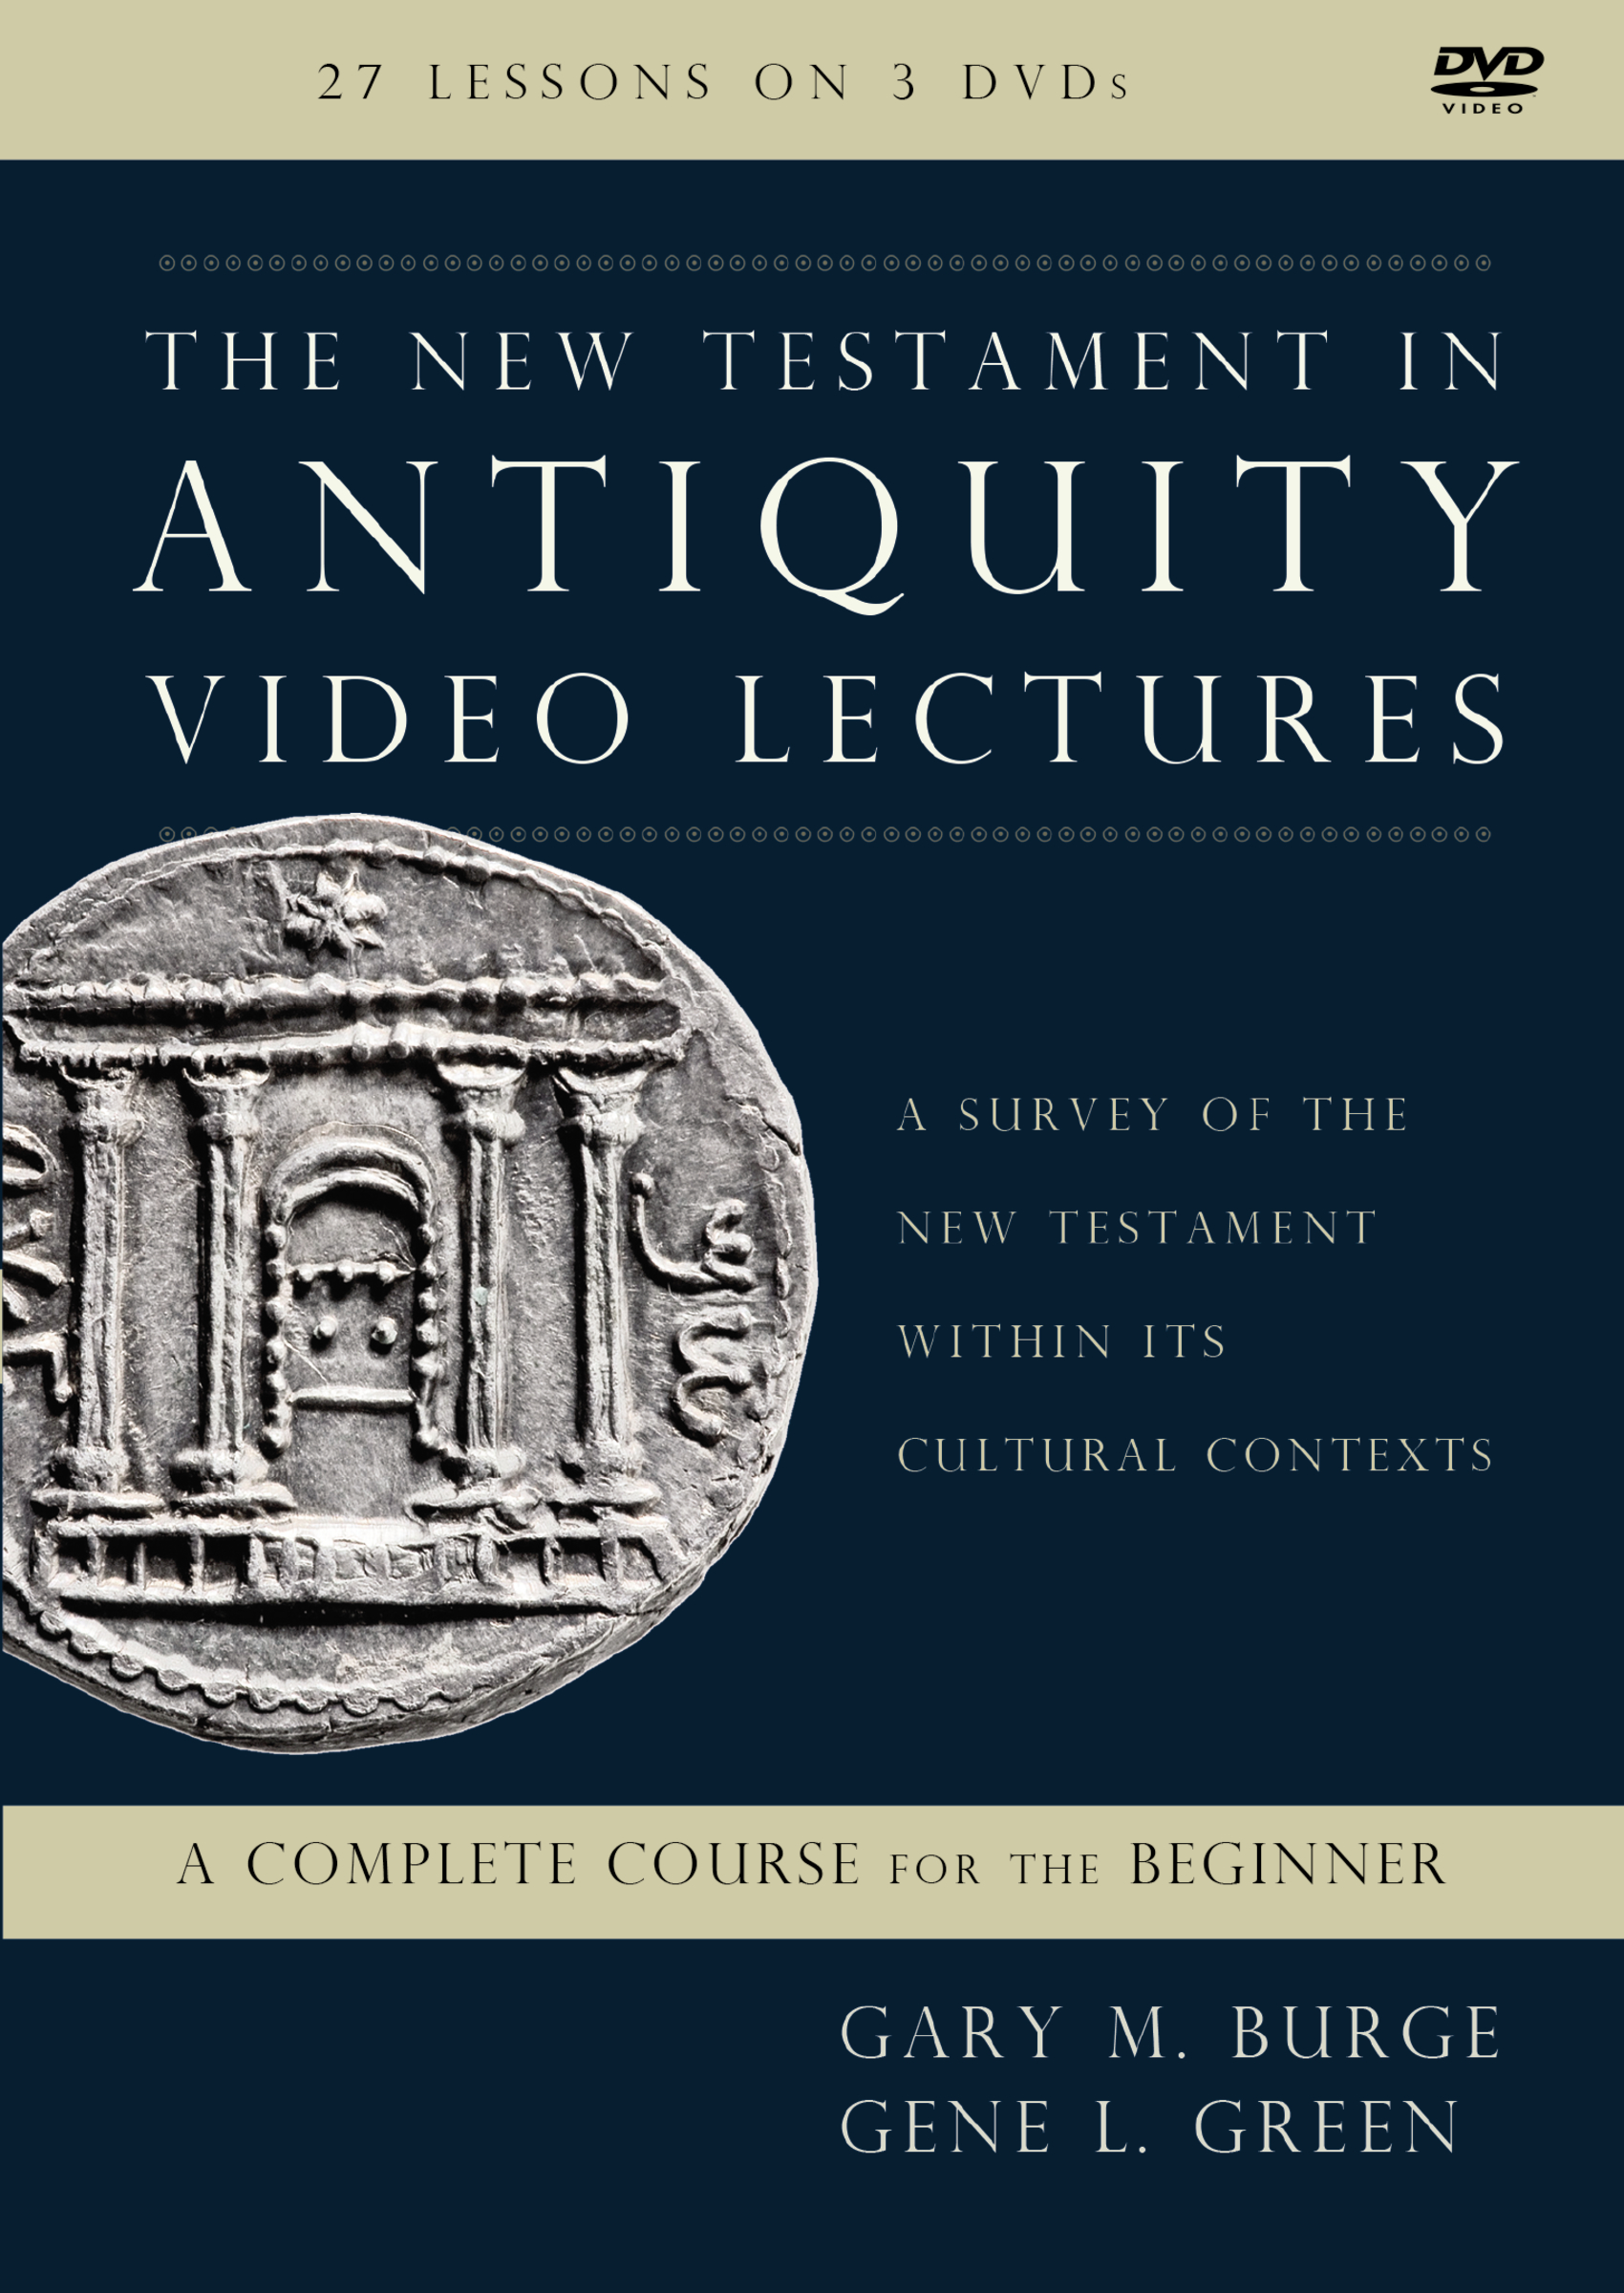 The New Testament in Antiquity Video Lectures